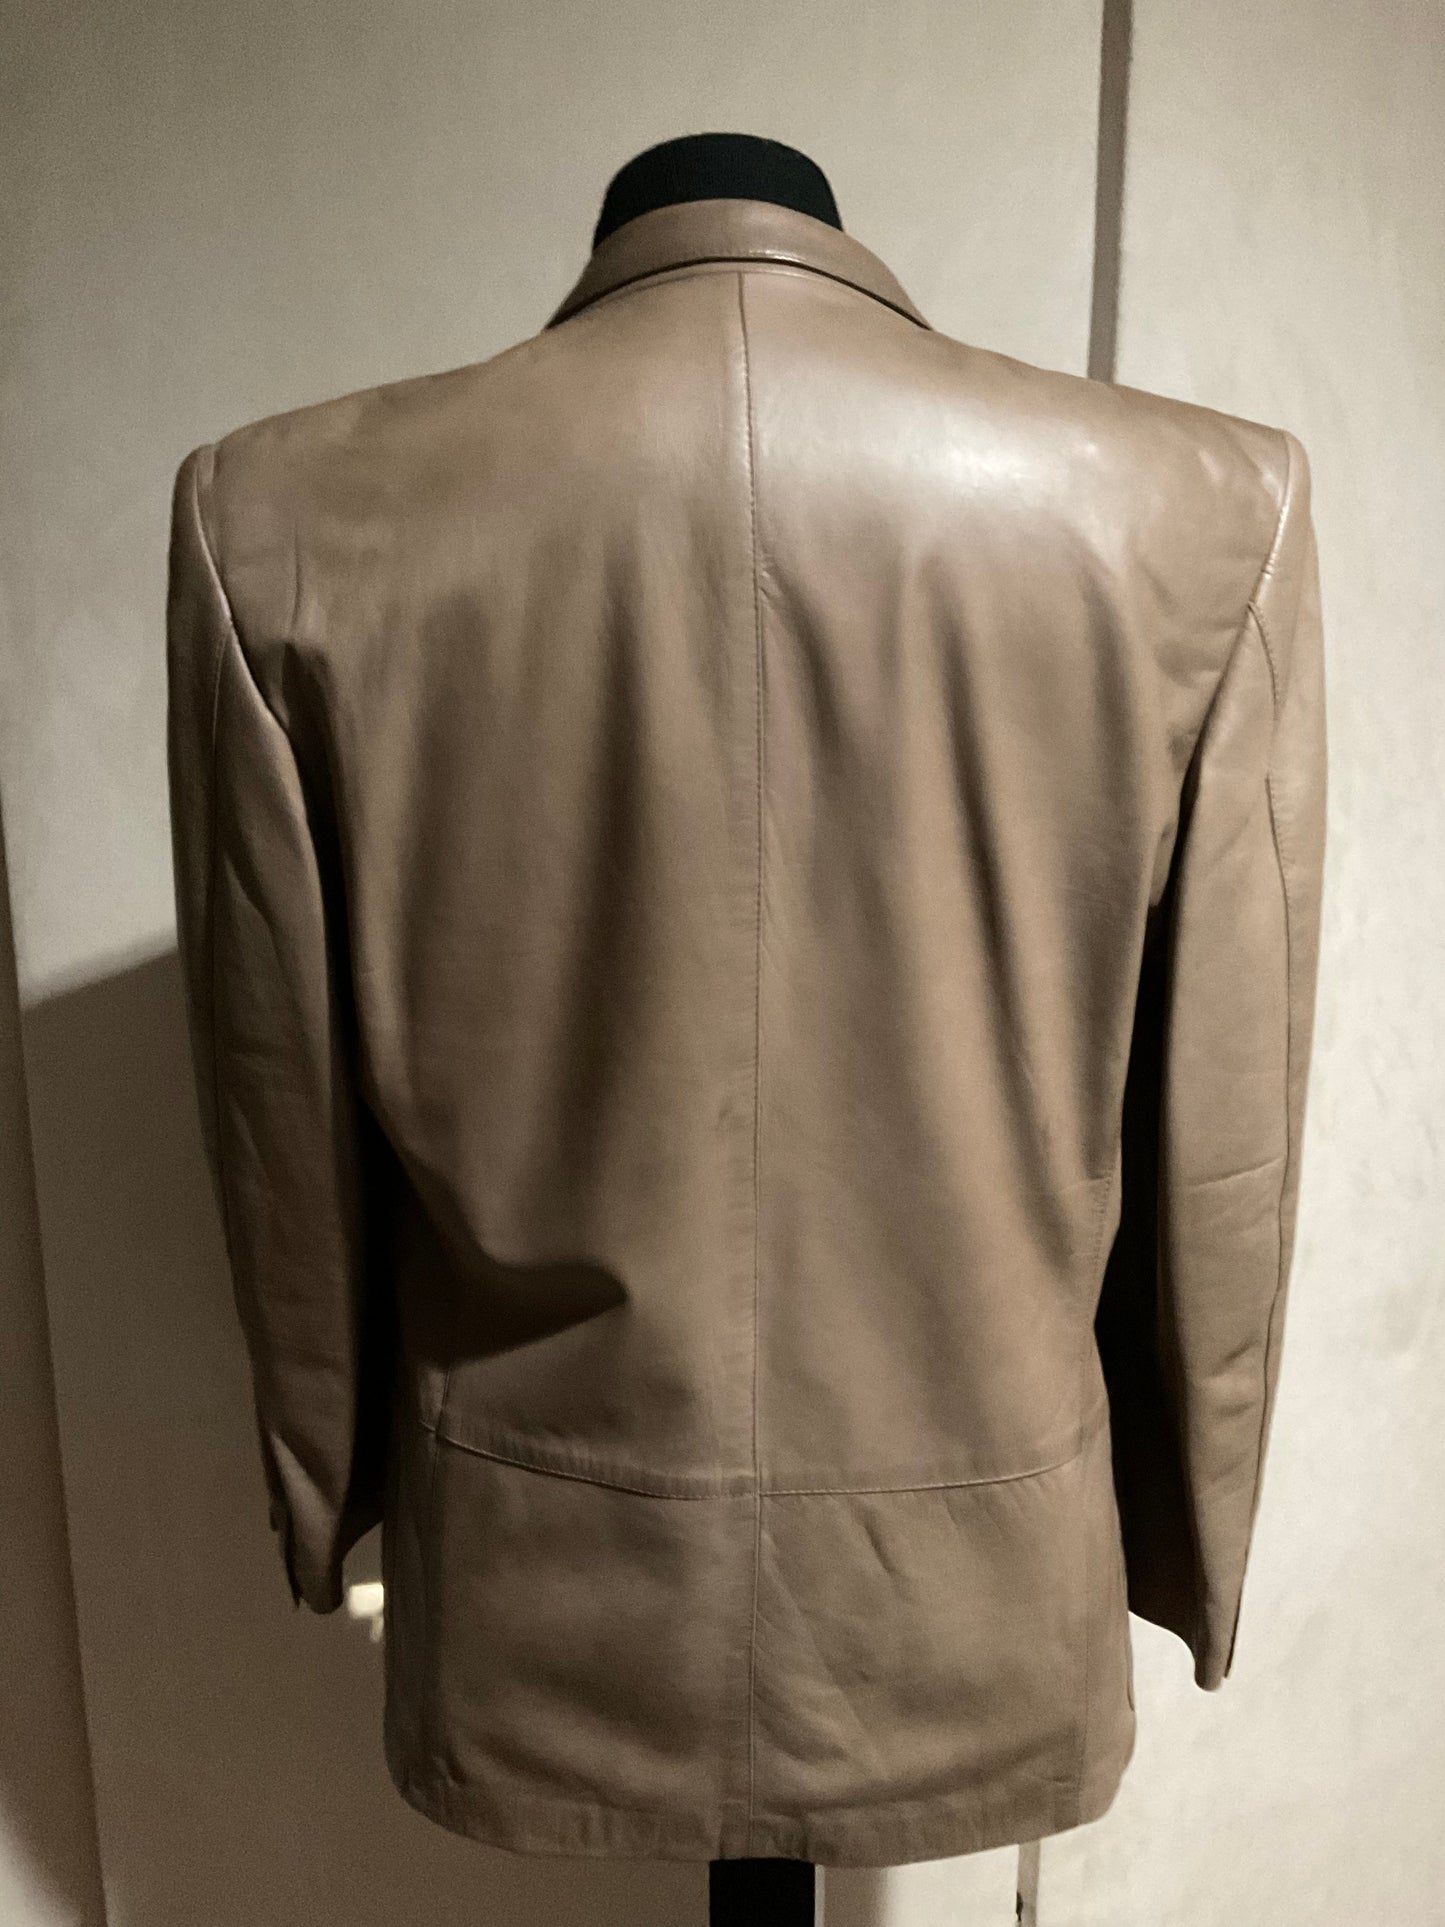 R P LEATHER BLAZER JACKET / TAUPE / MEDIUM / MADE IN ITALY